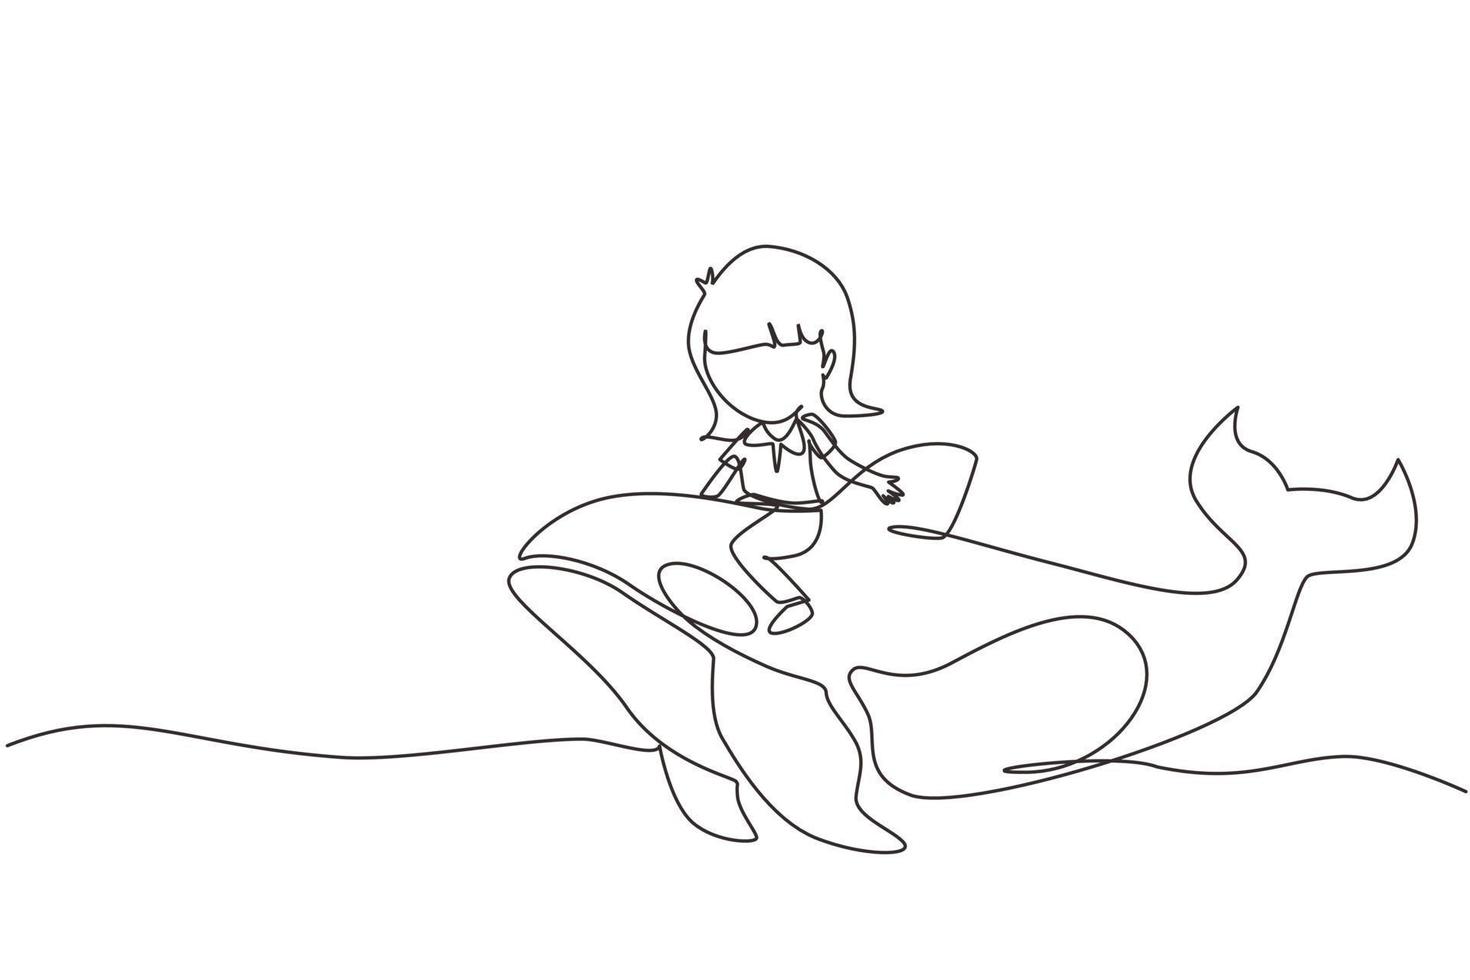 Single continuous line drawing little girl riding orca. Young kid sitting on back whale killer in swimming pool. Whale killer or orca in water. Dynamic one line draw graphic design vector illustration